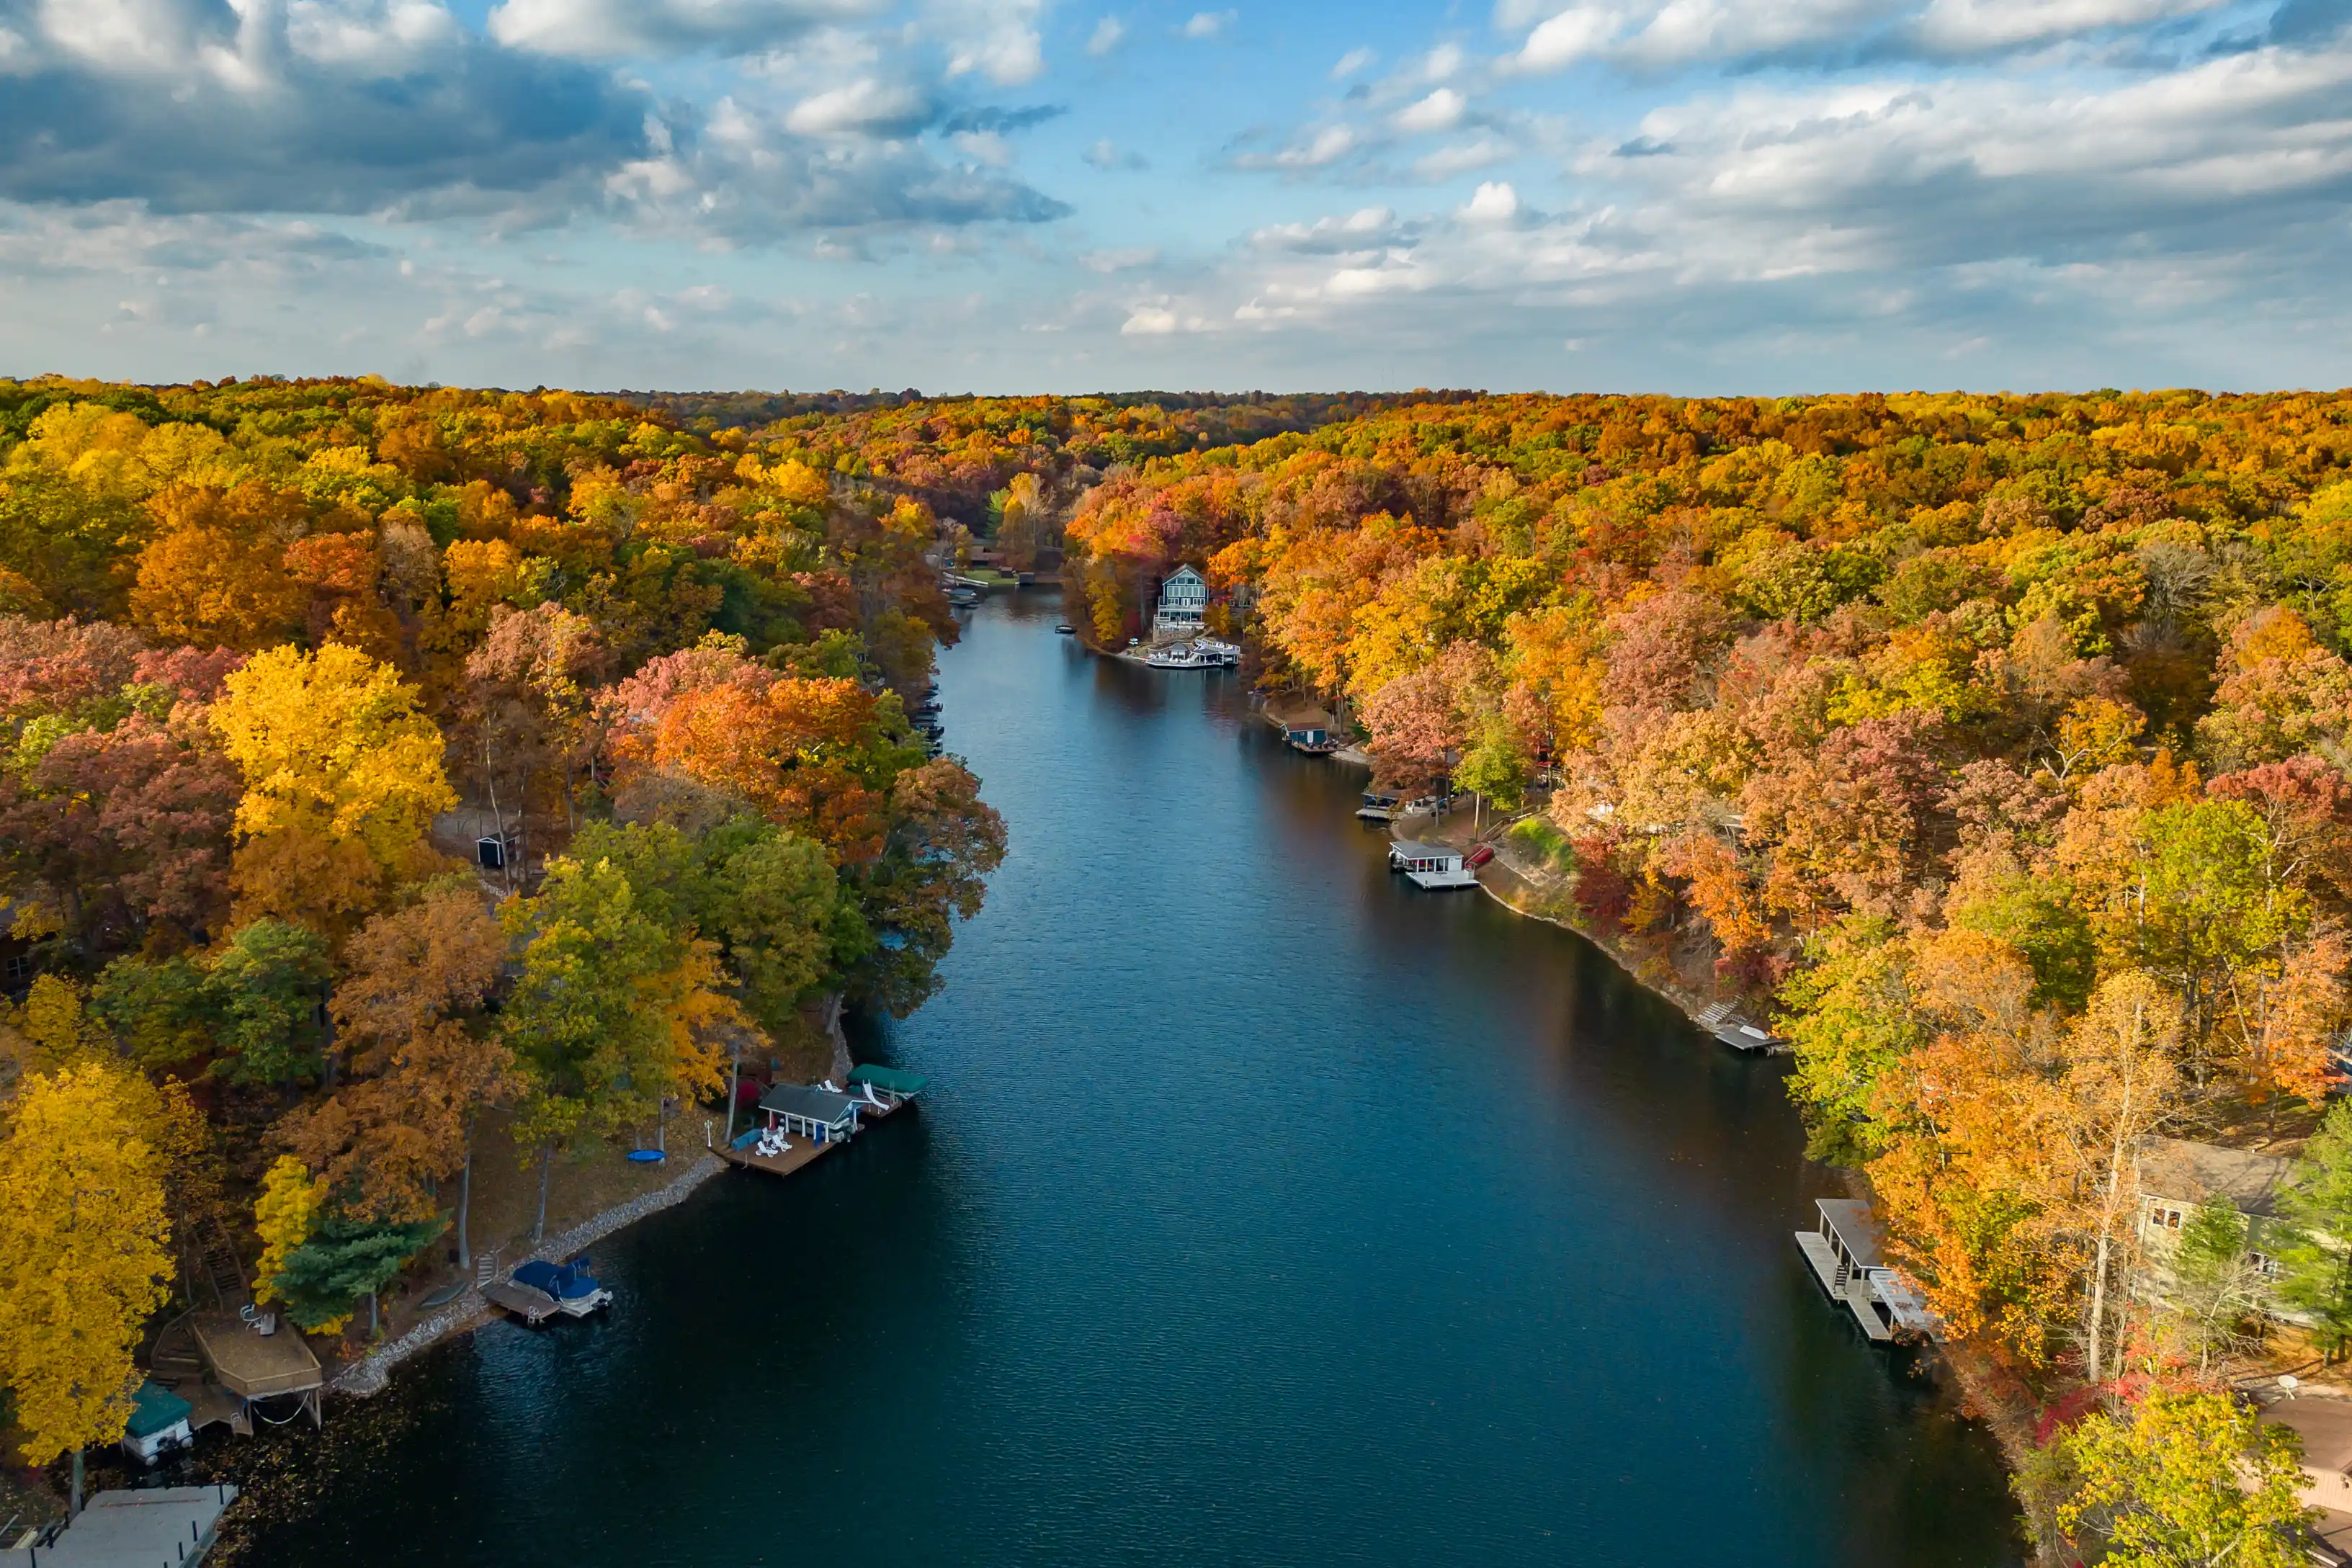 Aerial view of a river flanked by trees with vibrant autumn foliage and docks with boats near the banks.